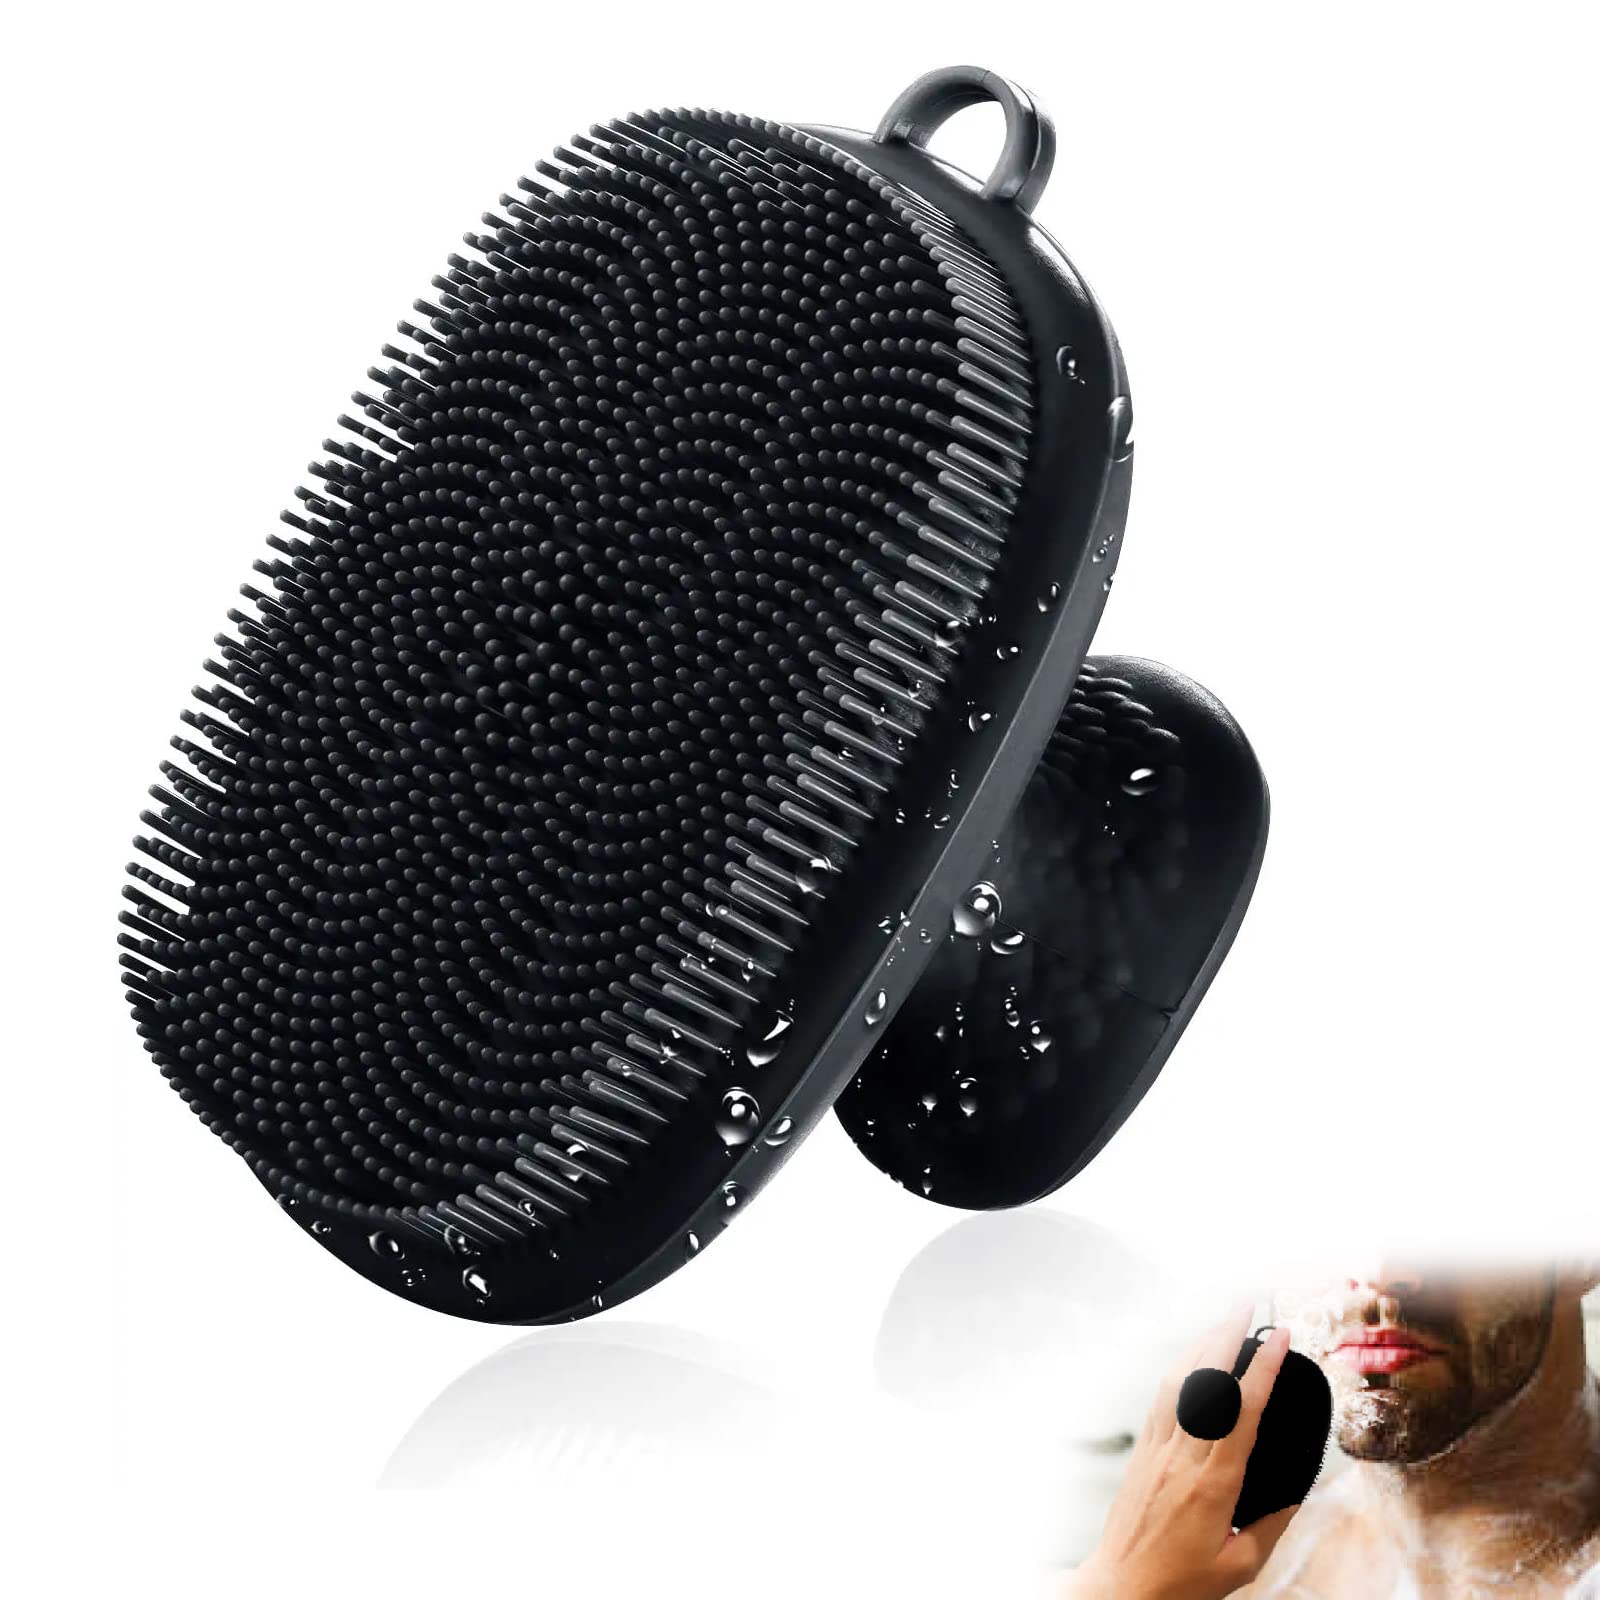 Silicone Face Scrubber for Men ,Manual Waterproof Cleansing Skin Care Face Wash Brushes for Facial Cleansing and Exfoliating (Black)